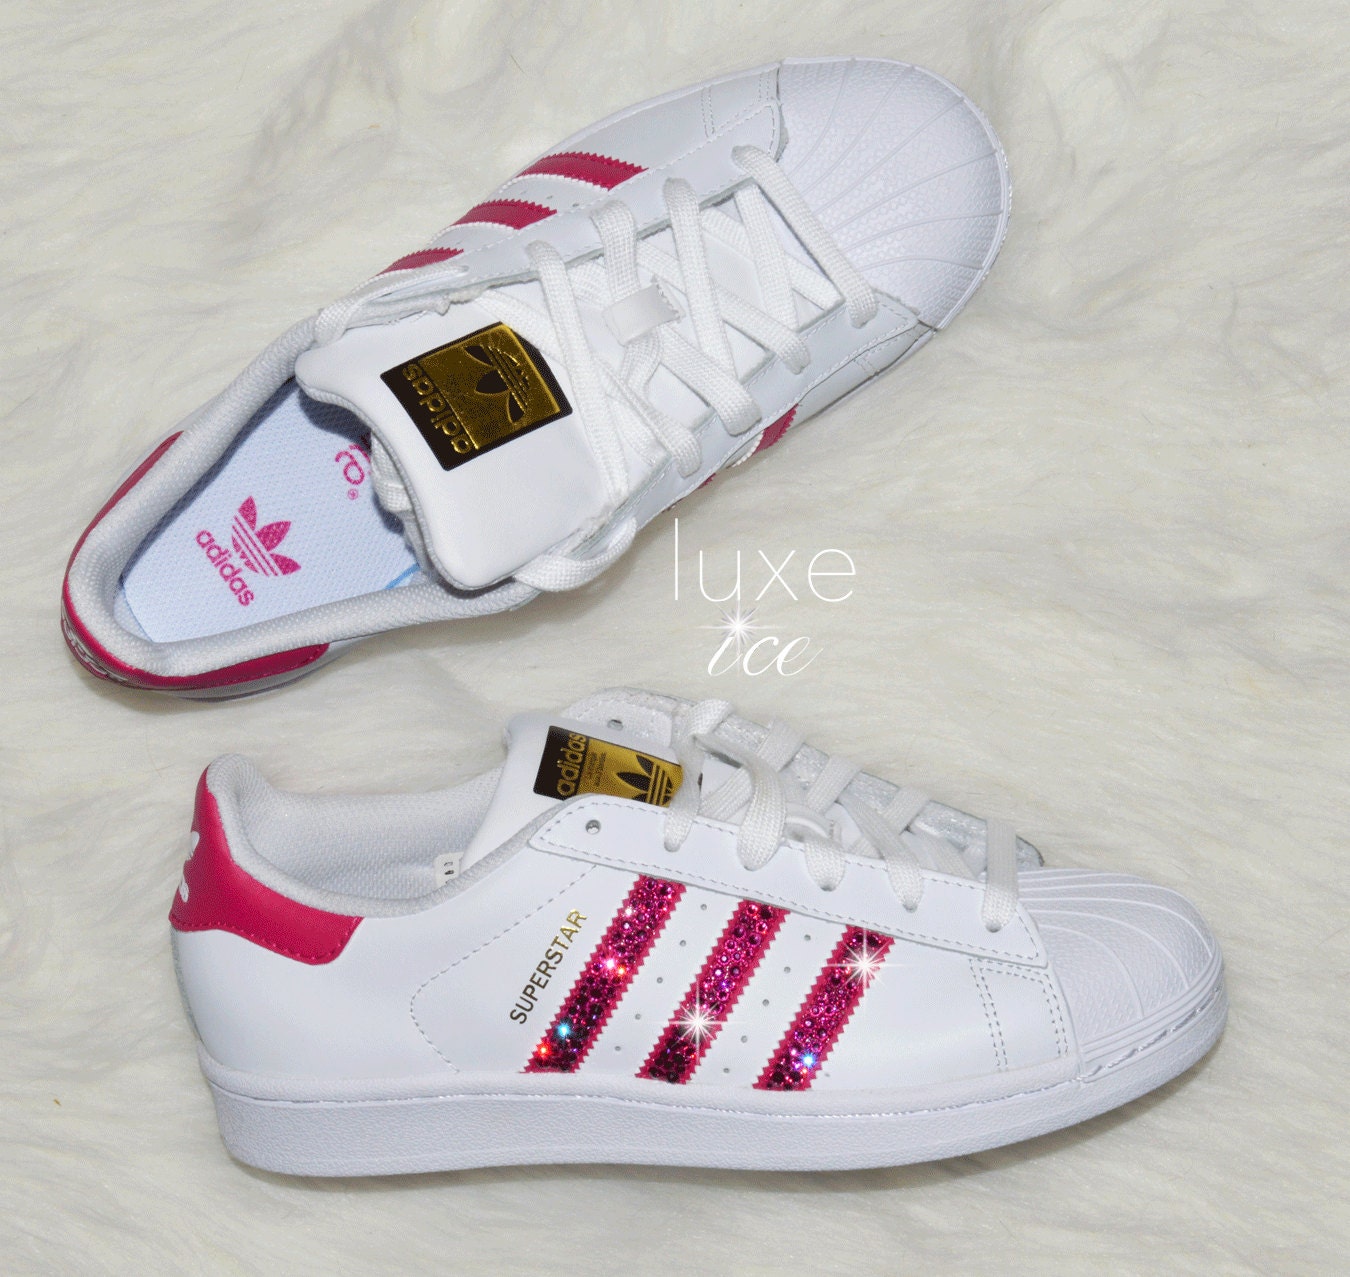 Adidas Original Superstar White/Bold Pink with by ShopLuxeIce